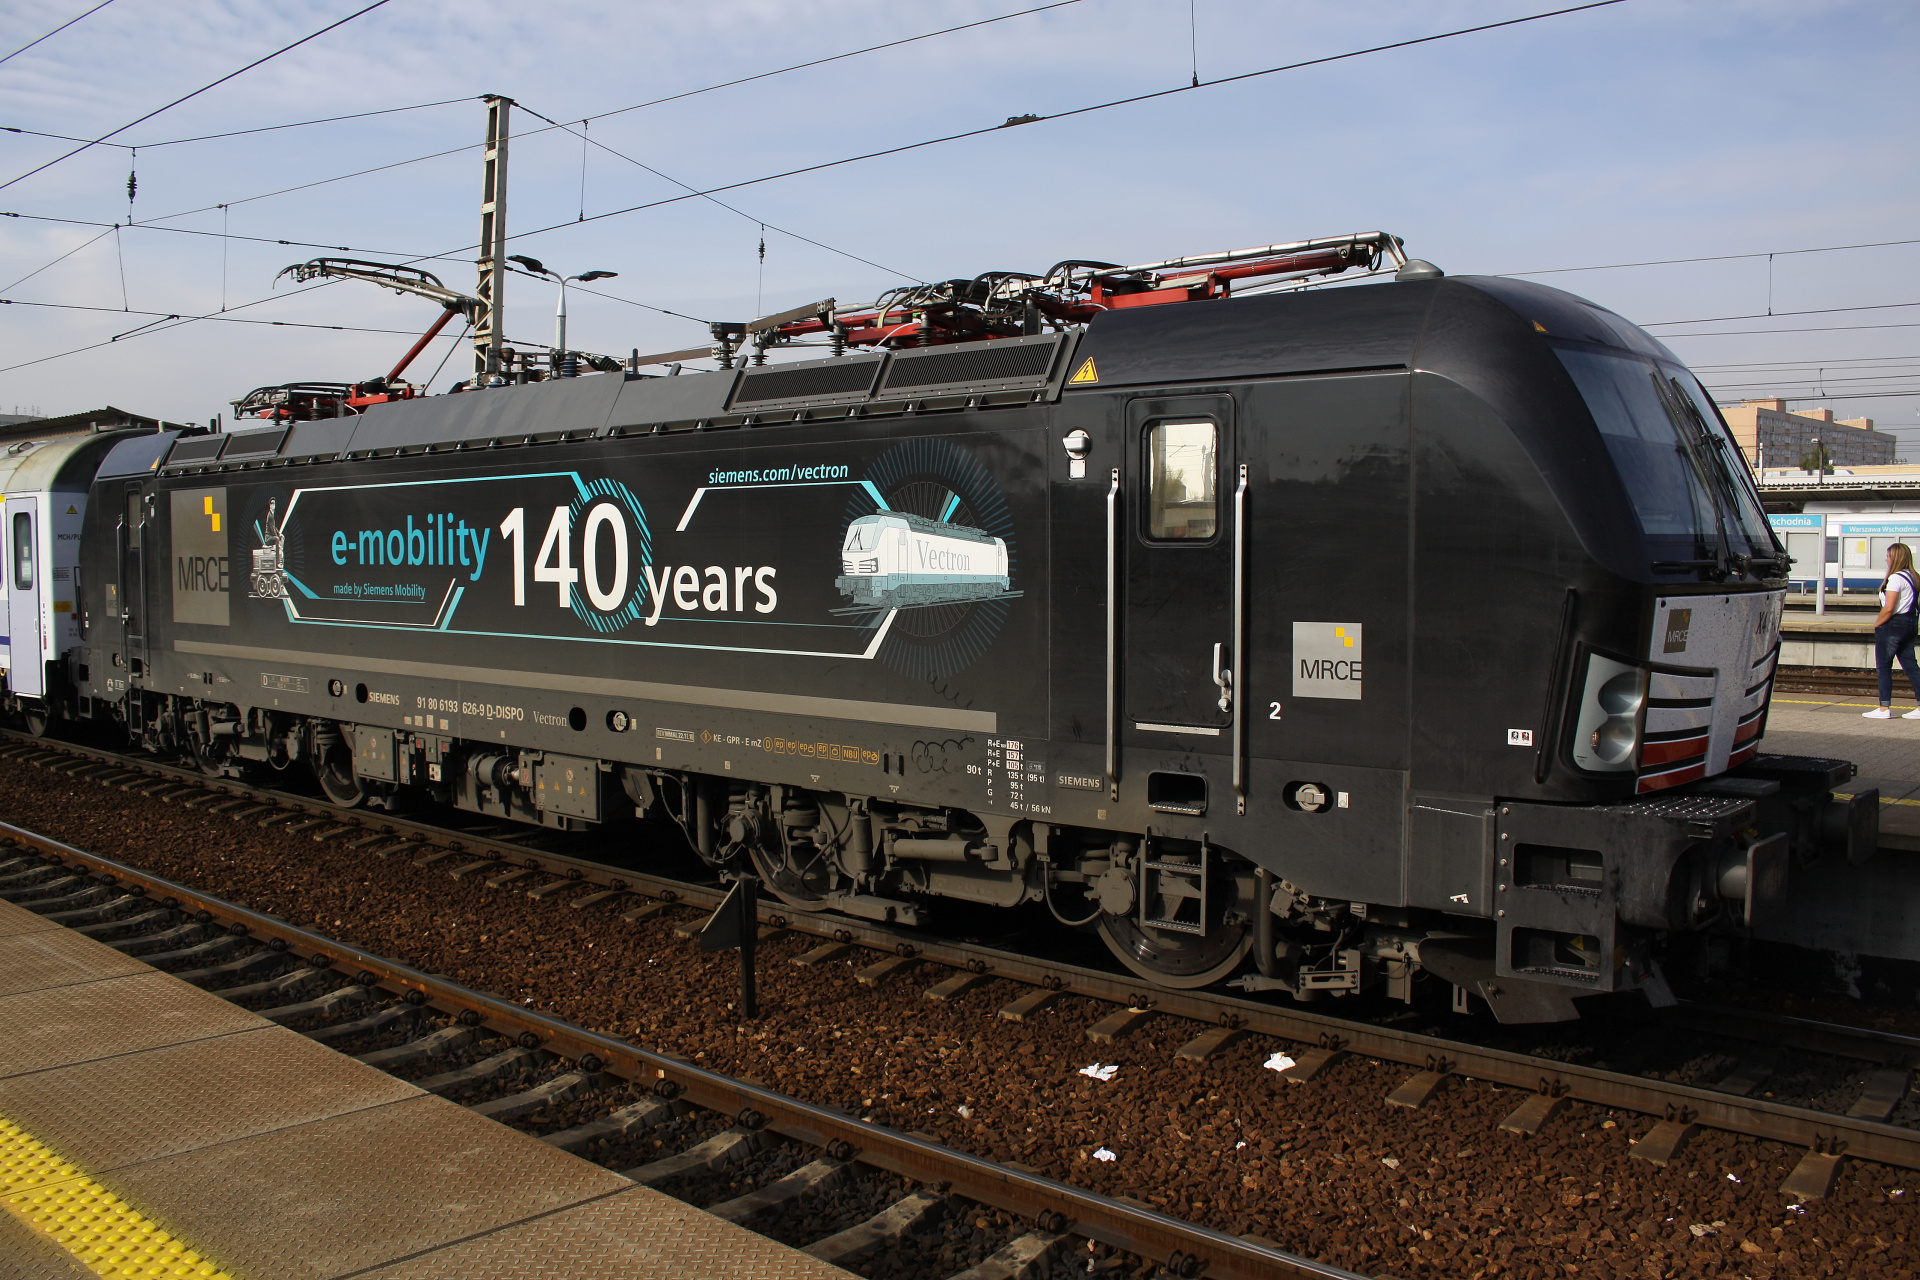 X4-E-Loco-AB Vectron MS X4 E 626 (Siemens e-mobility. 140 years livery) (Vehicles » Trains and Locomotives » Siemens Vectron)